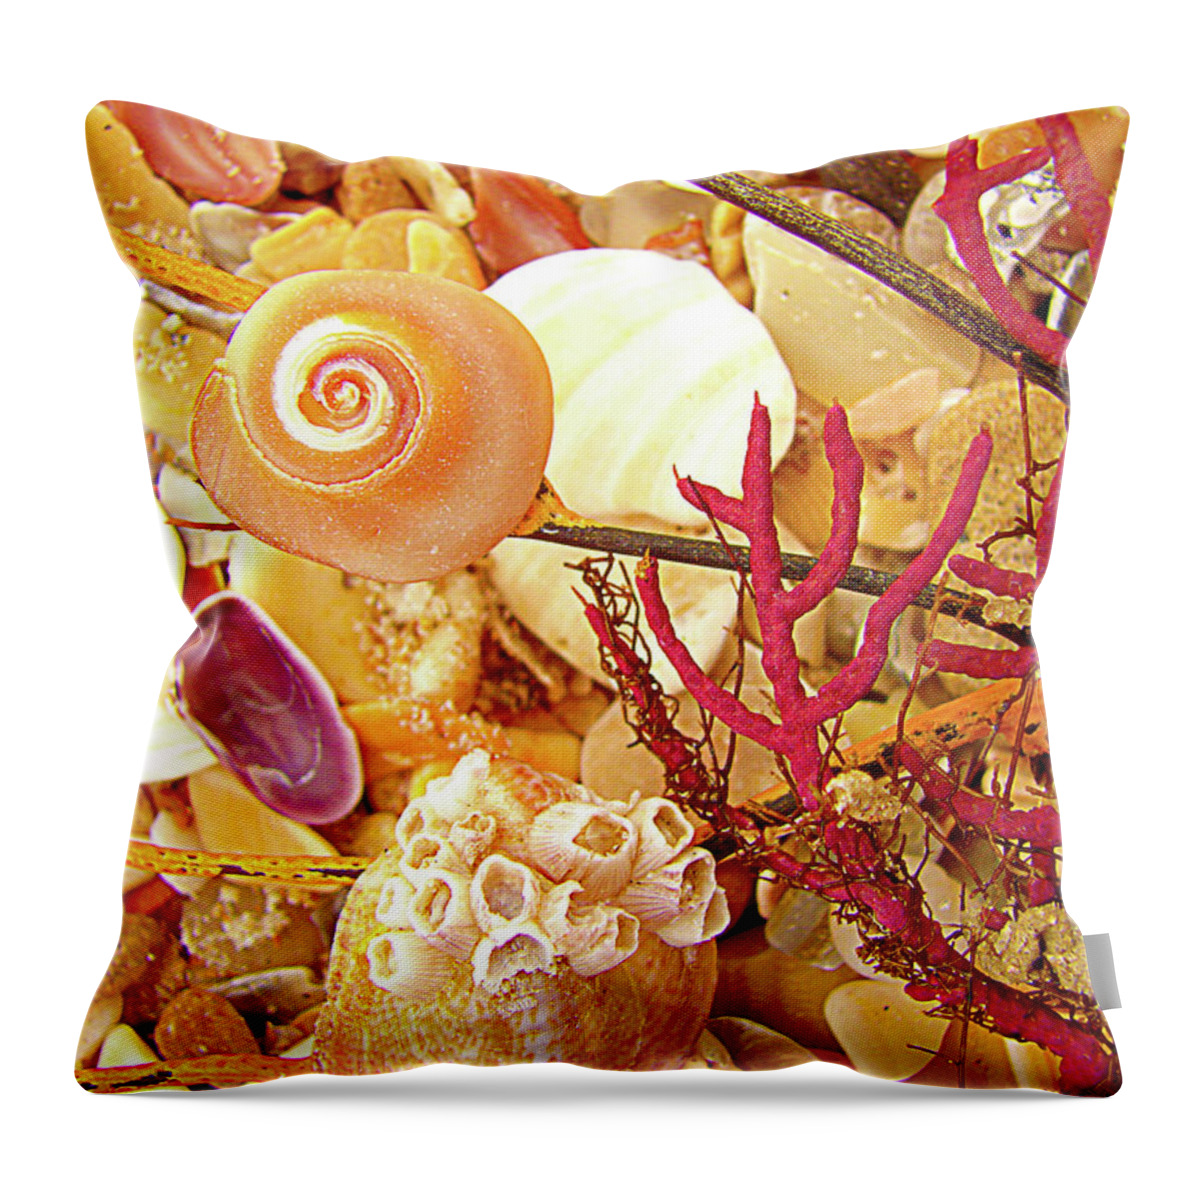 Shells Throw Pillow featuring the photograph See World by Laura Brightwood